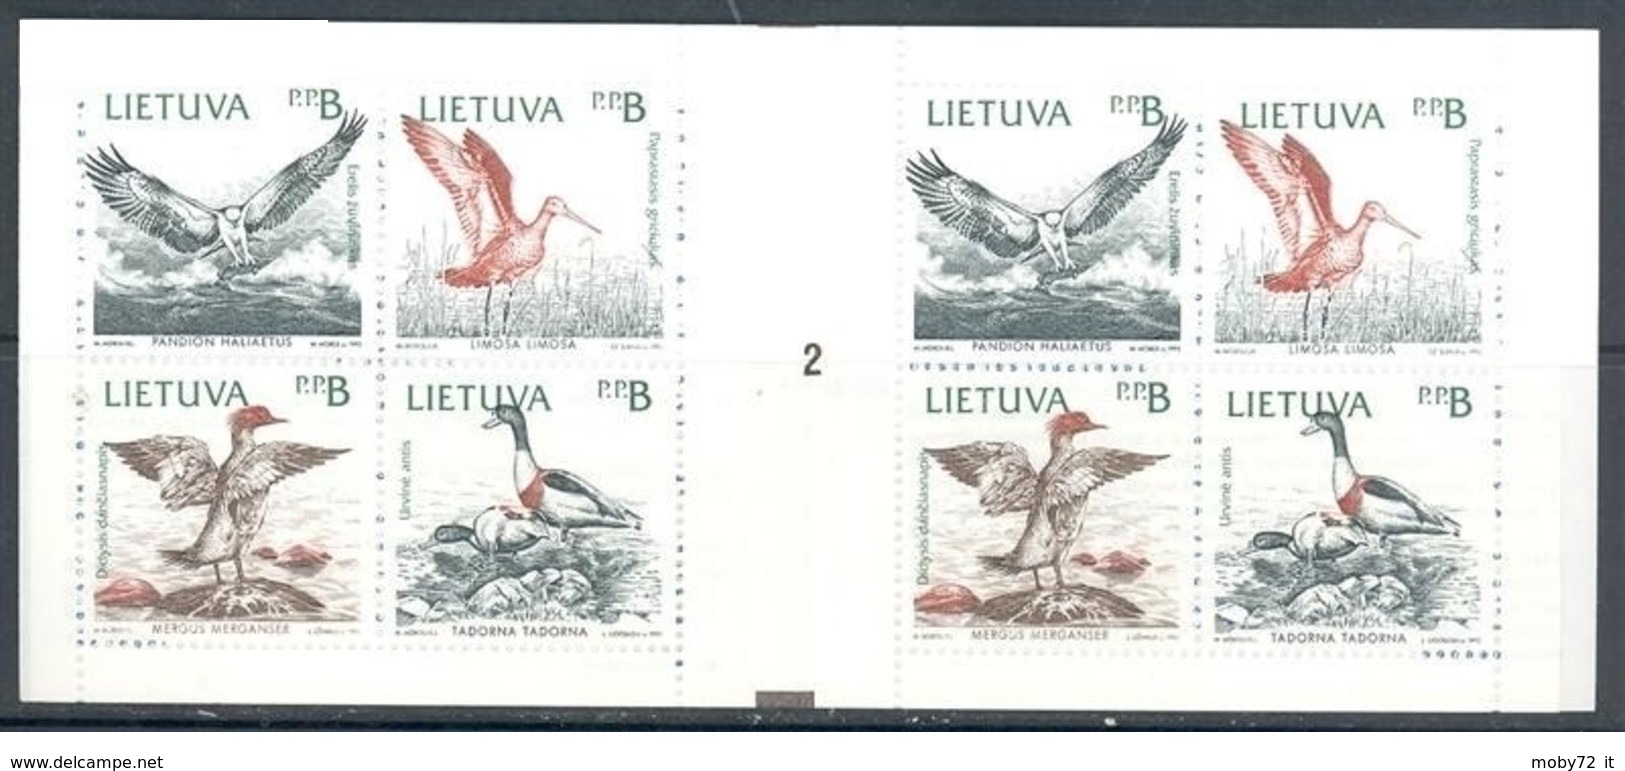 Lituania - 1992 - Nuovo/new MNH - Natura - Booklet - Type 2 - Mi N. 501/05 - Lithuania